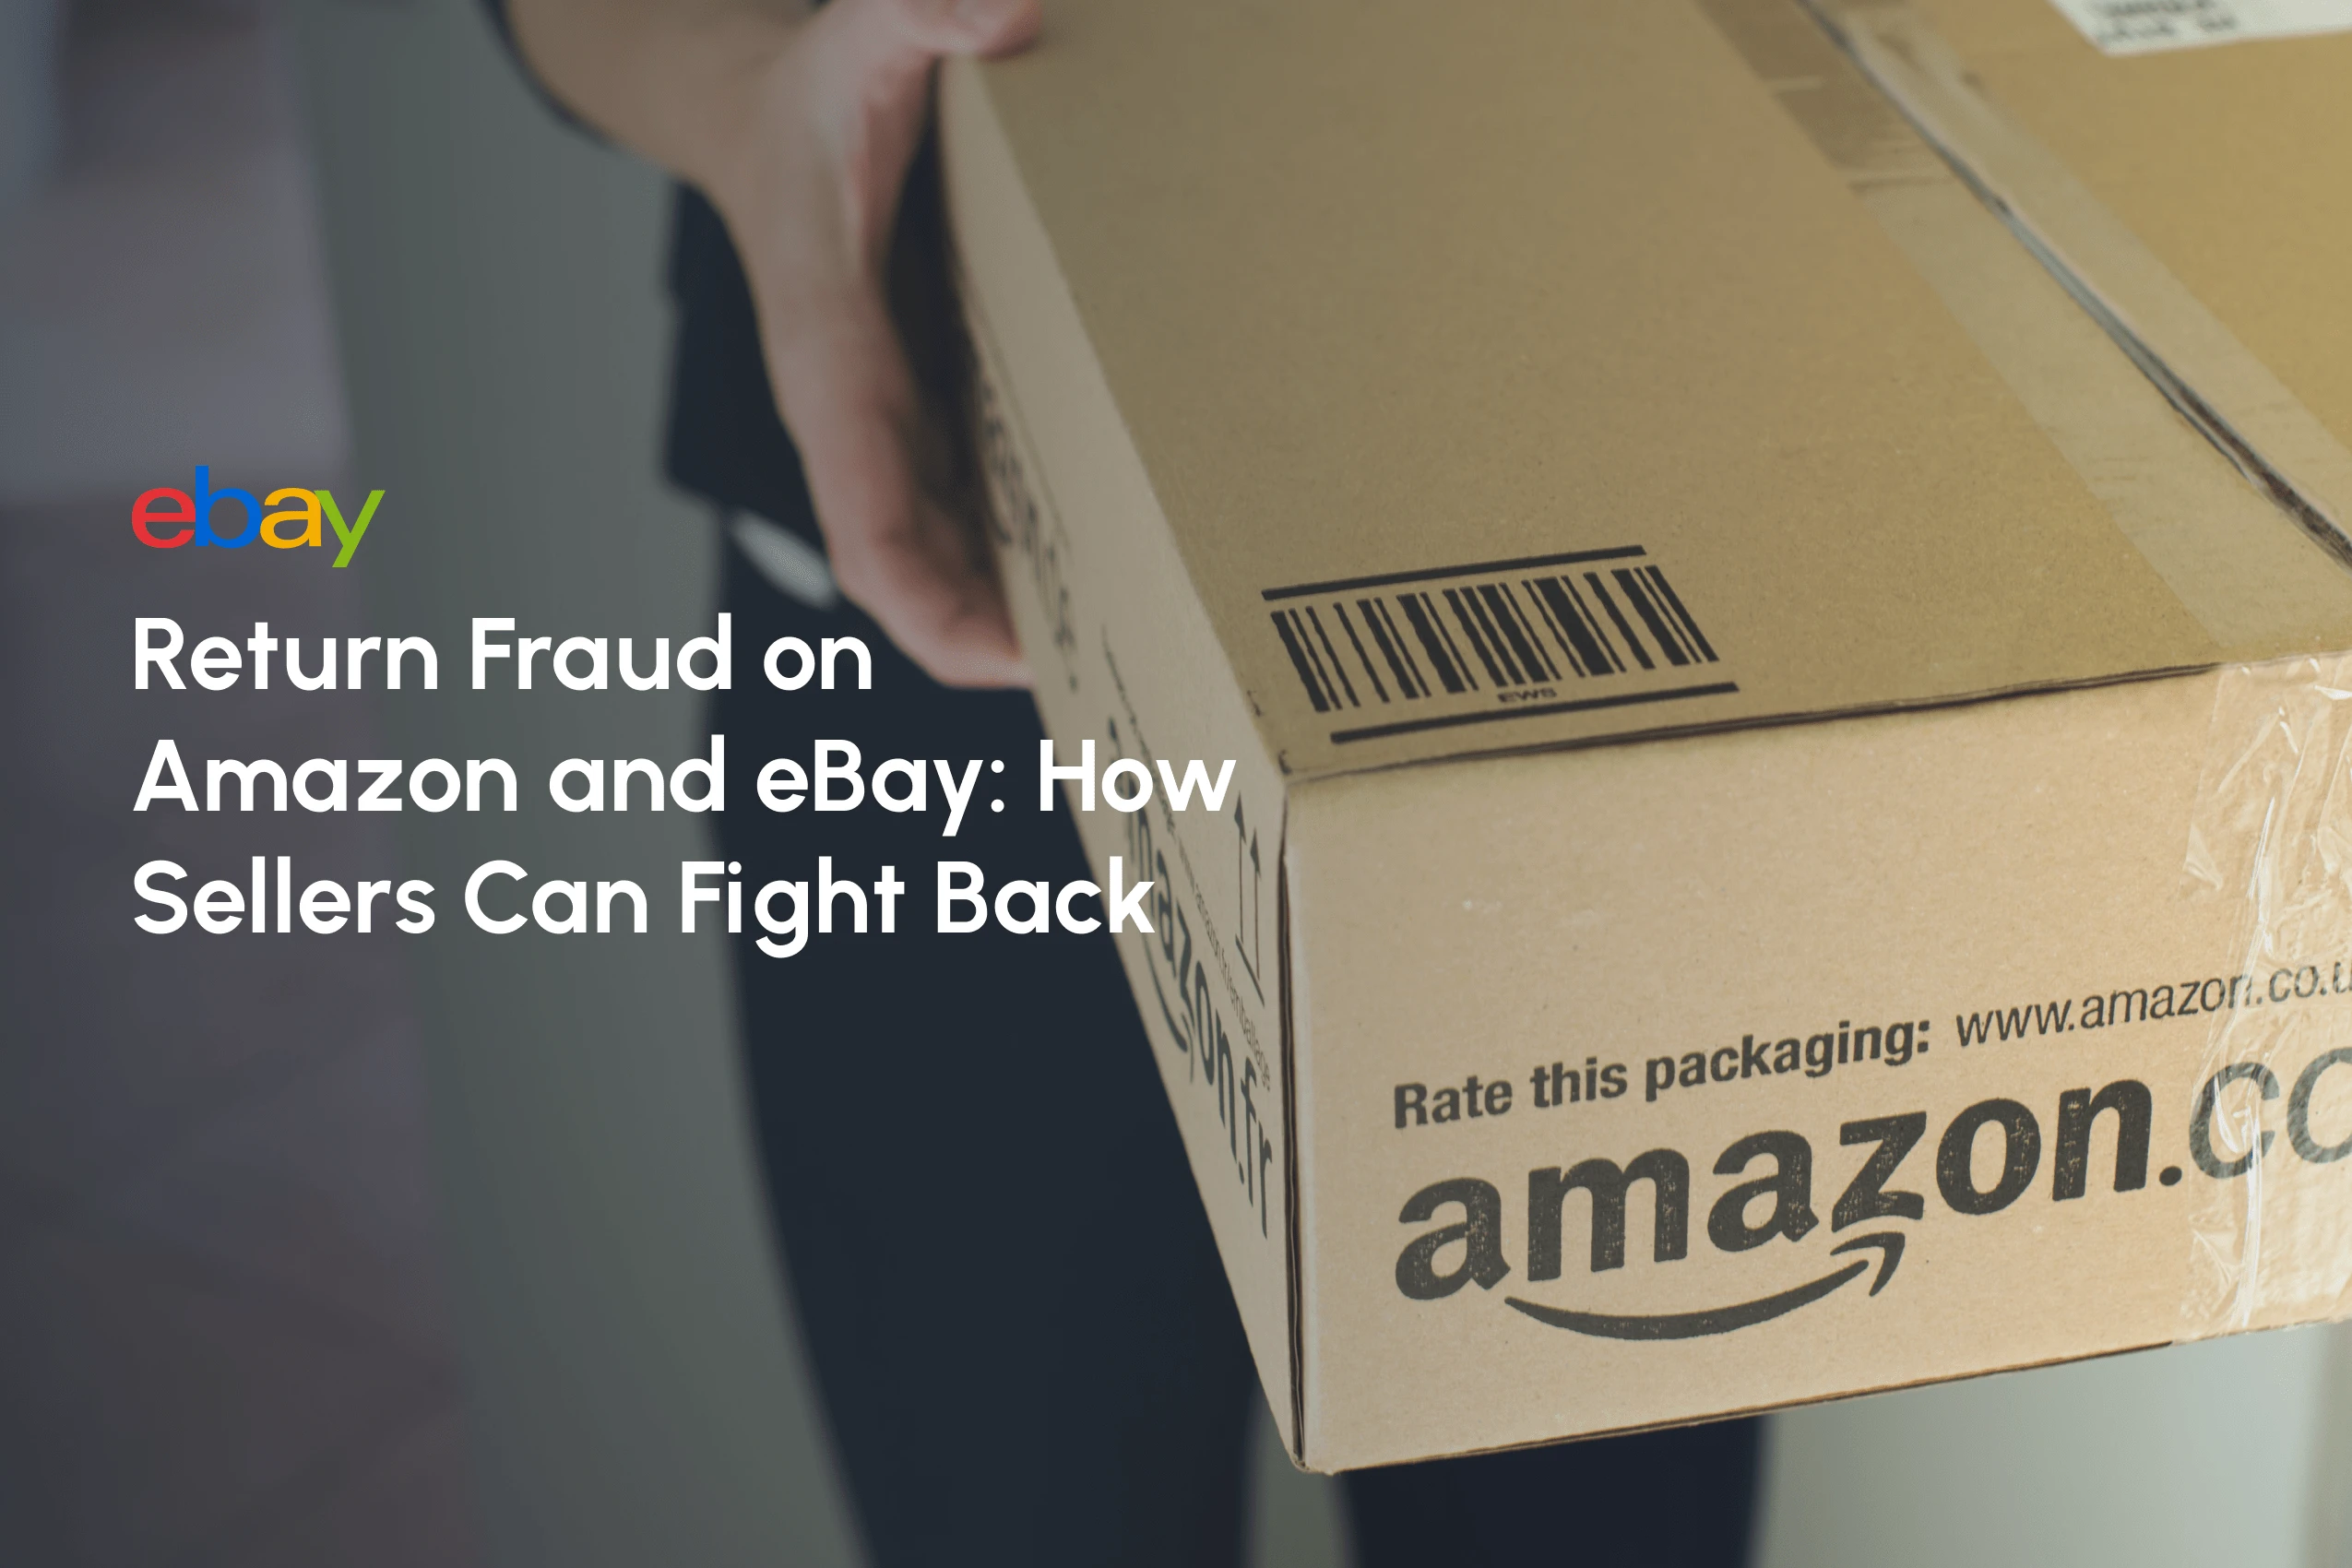 Return Fraud on Amazon and eBay – How Sellers Can Fight Back